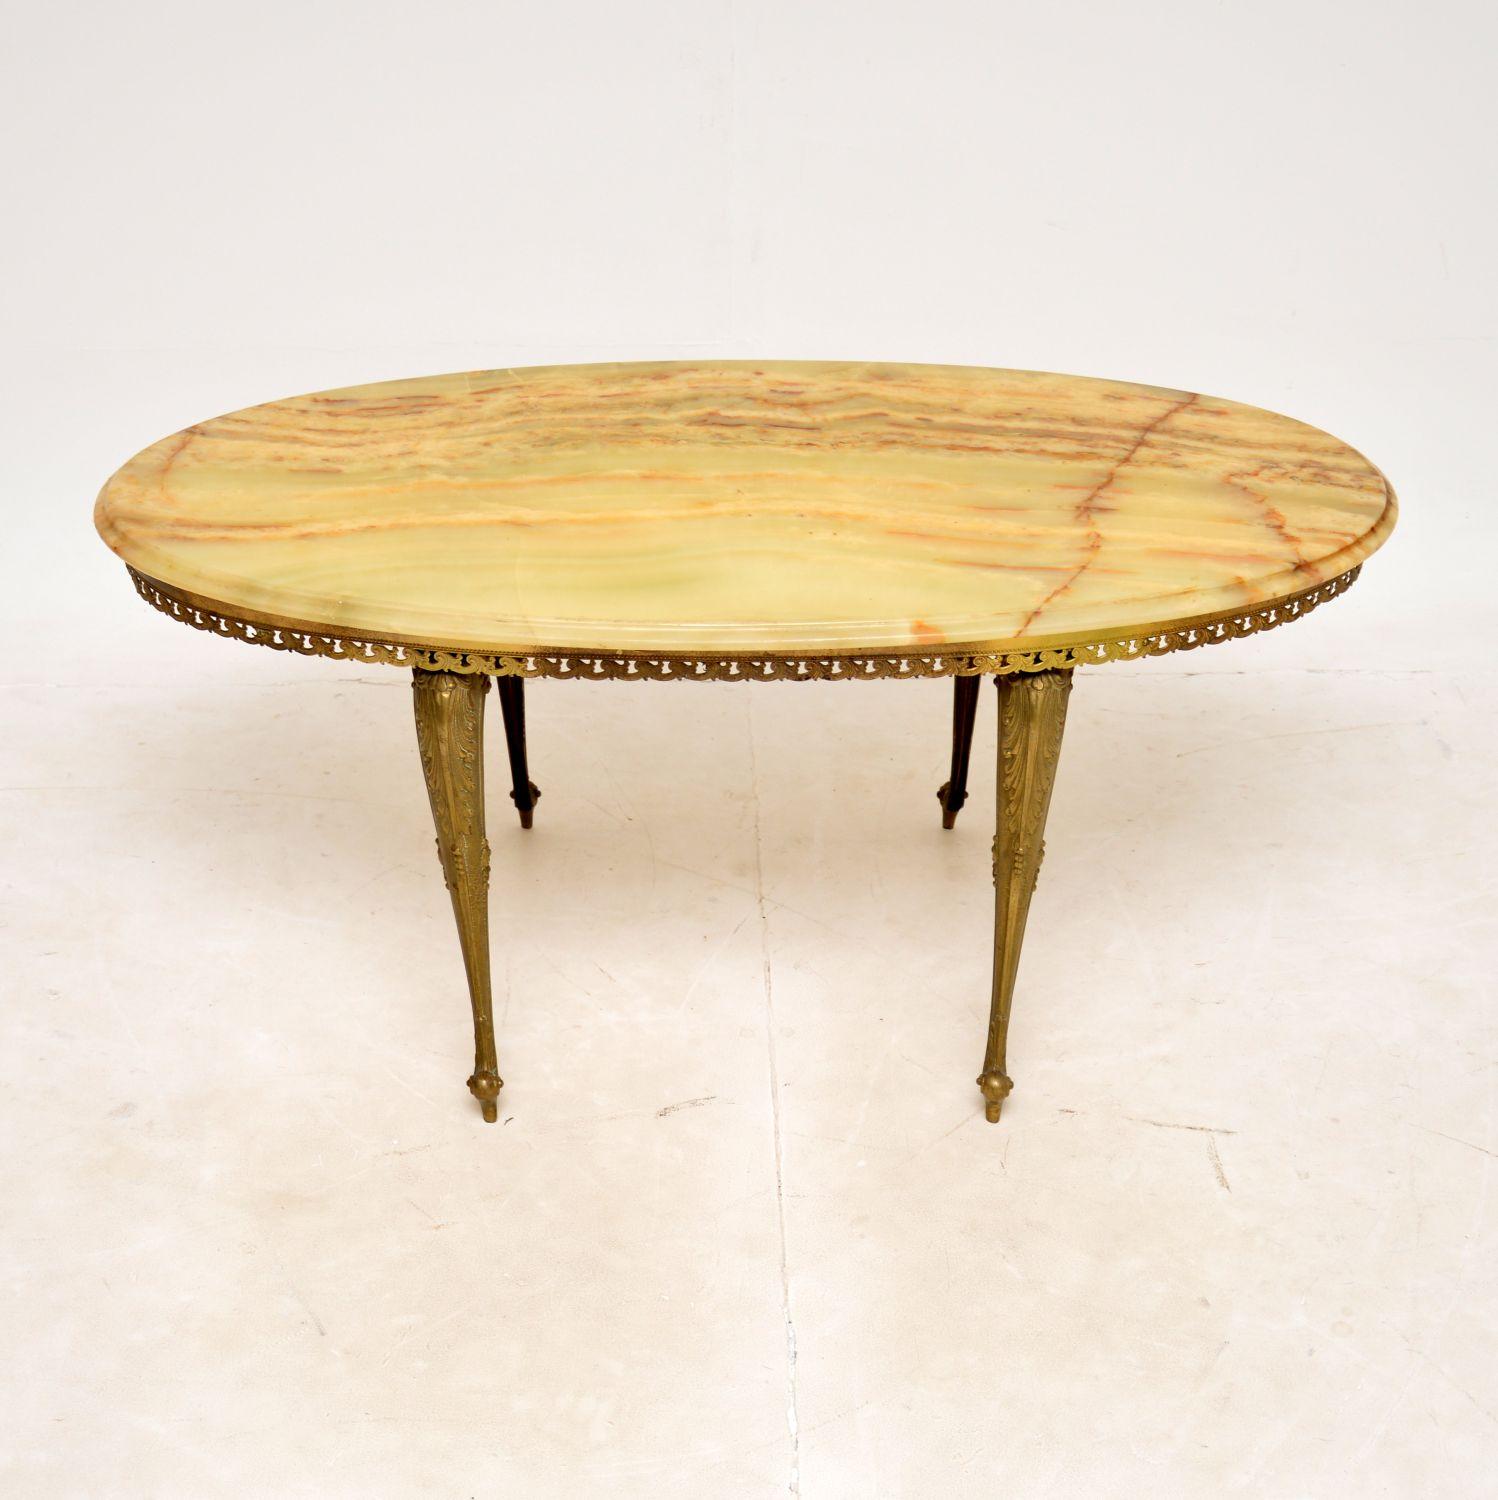 A beautiful and elegant antique French coffee table with a brass frame and oval onyx top, dating from around the 1930s.

This has a stylish design and is a very useful Size. The brass frame has gorgeous details, the onyx top has stunning colours